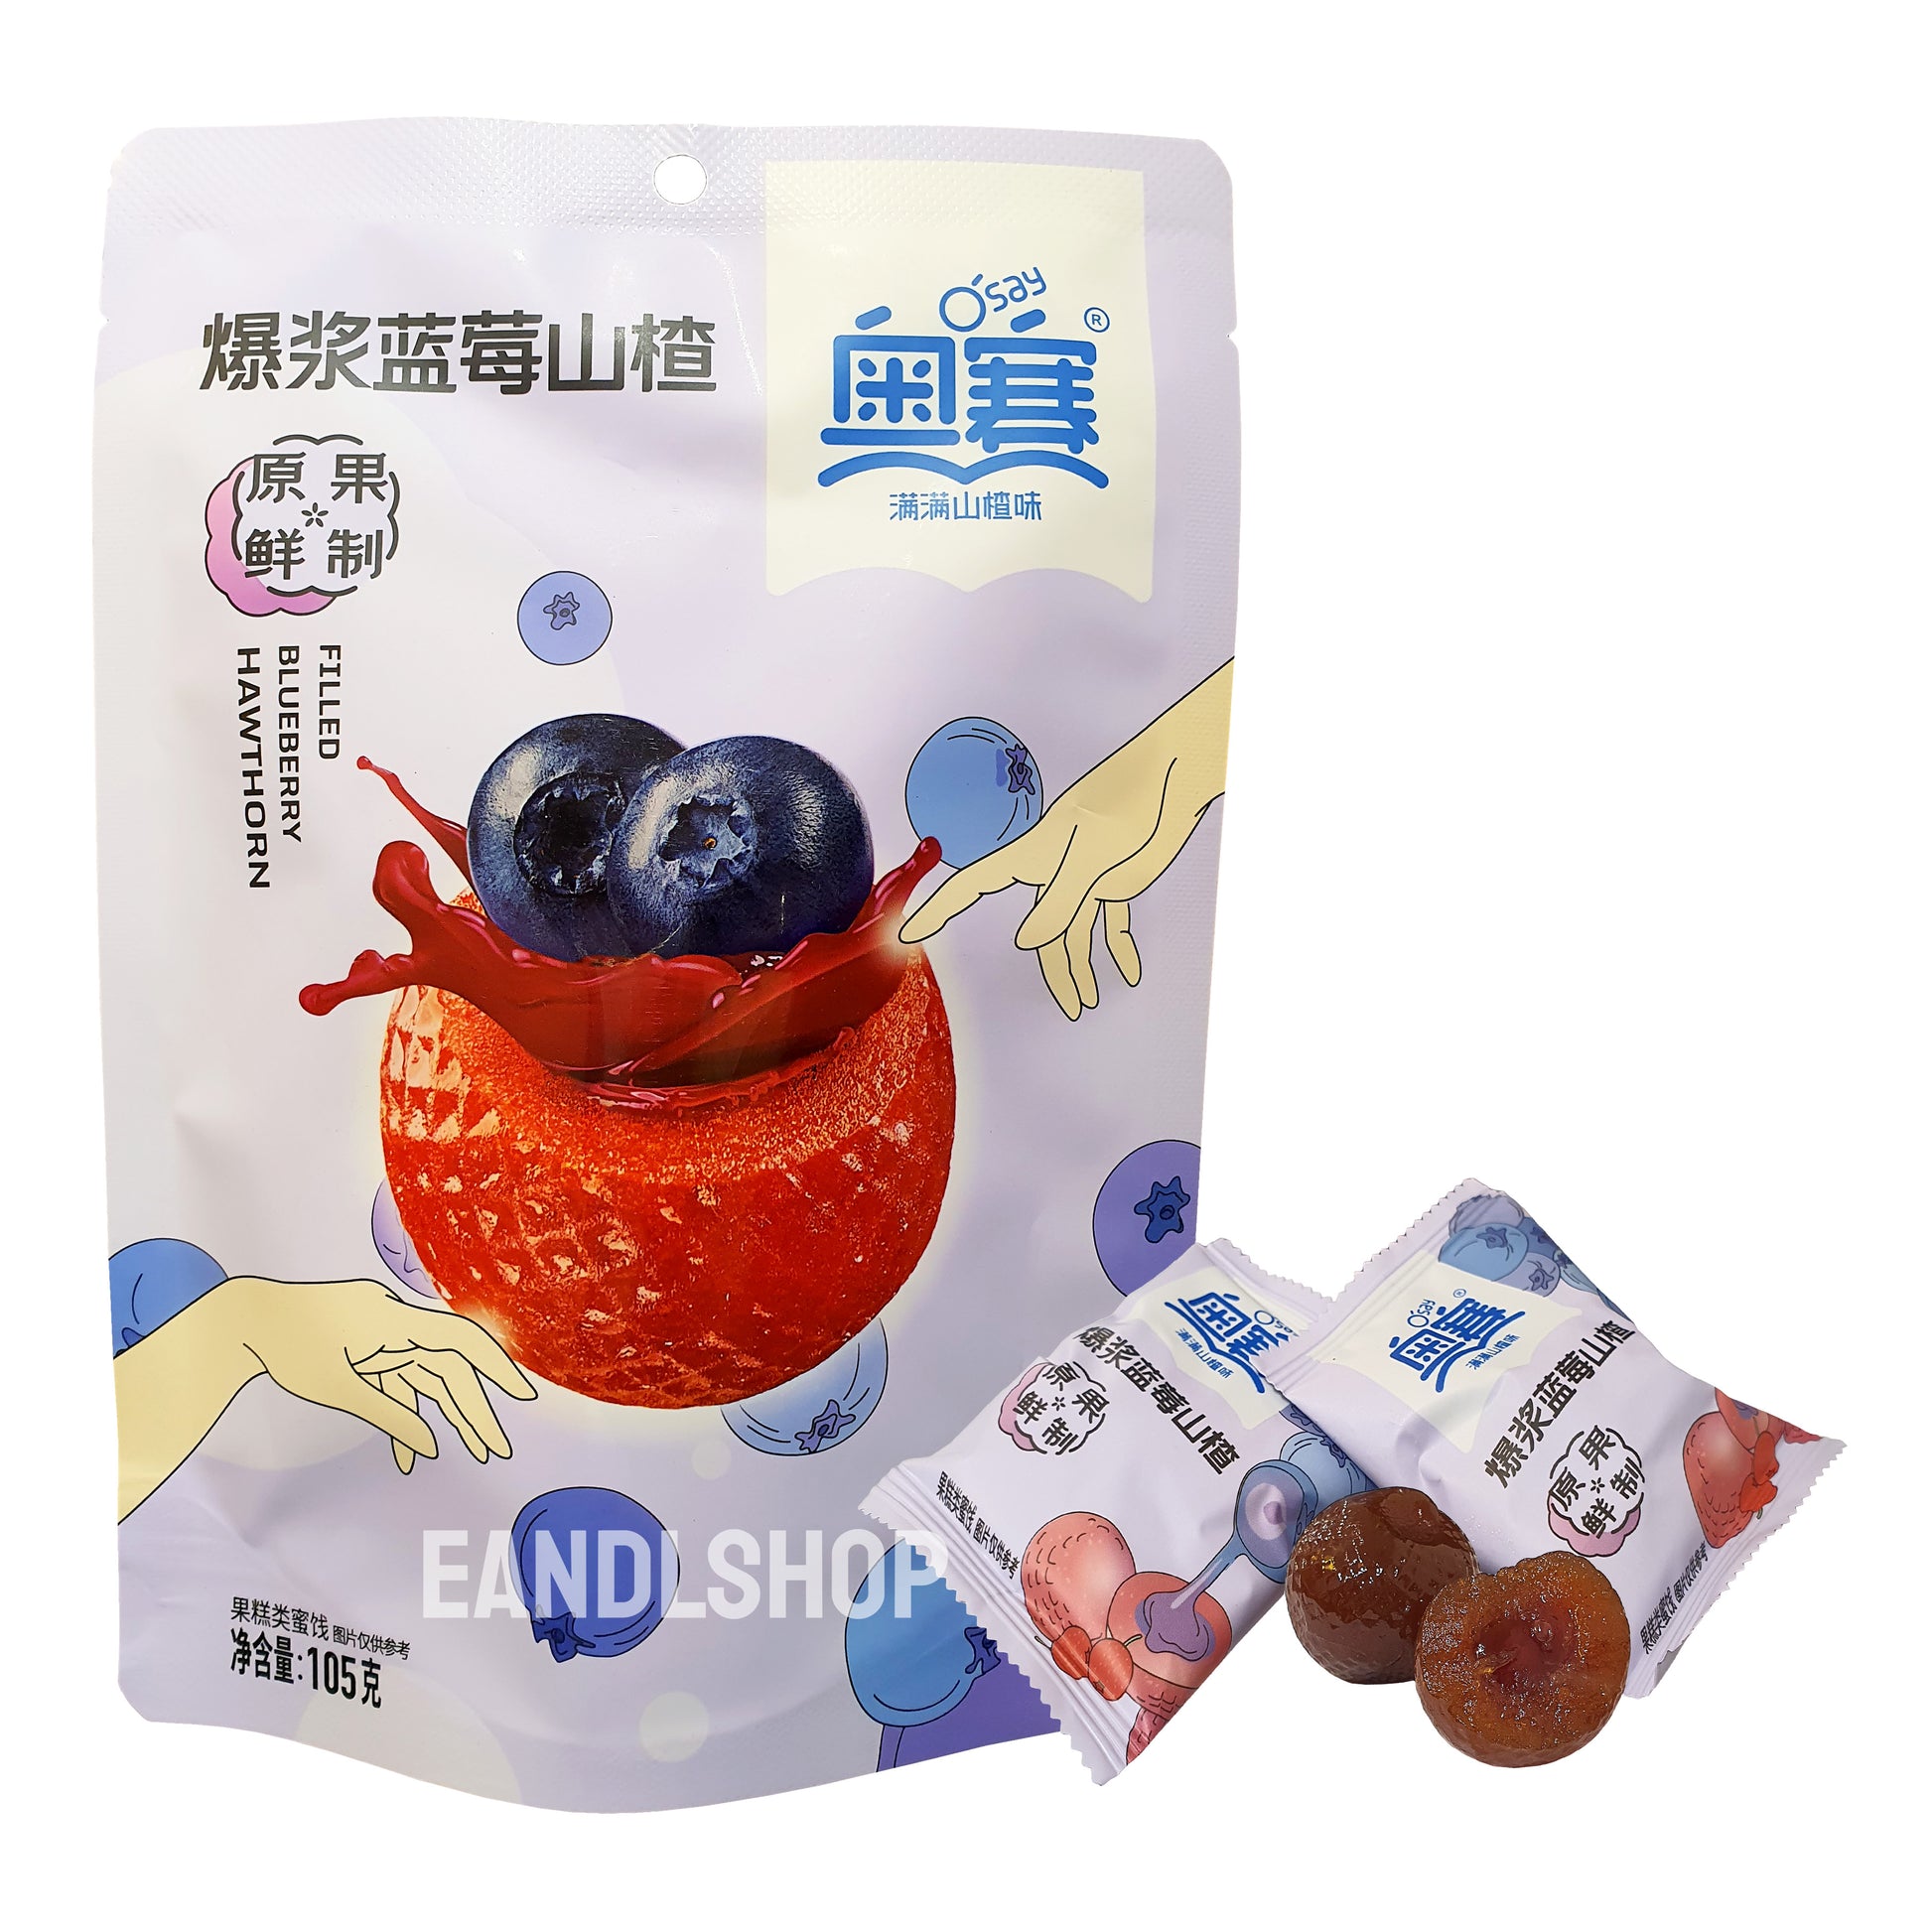 Filled Hawthorn Blueberry. Old-school biscuits, modern snacks (chips, crackers), cakes, gummies, plums, dried fruits, nuts, herbal tea – available at www.EANDLSHOP.com